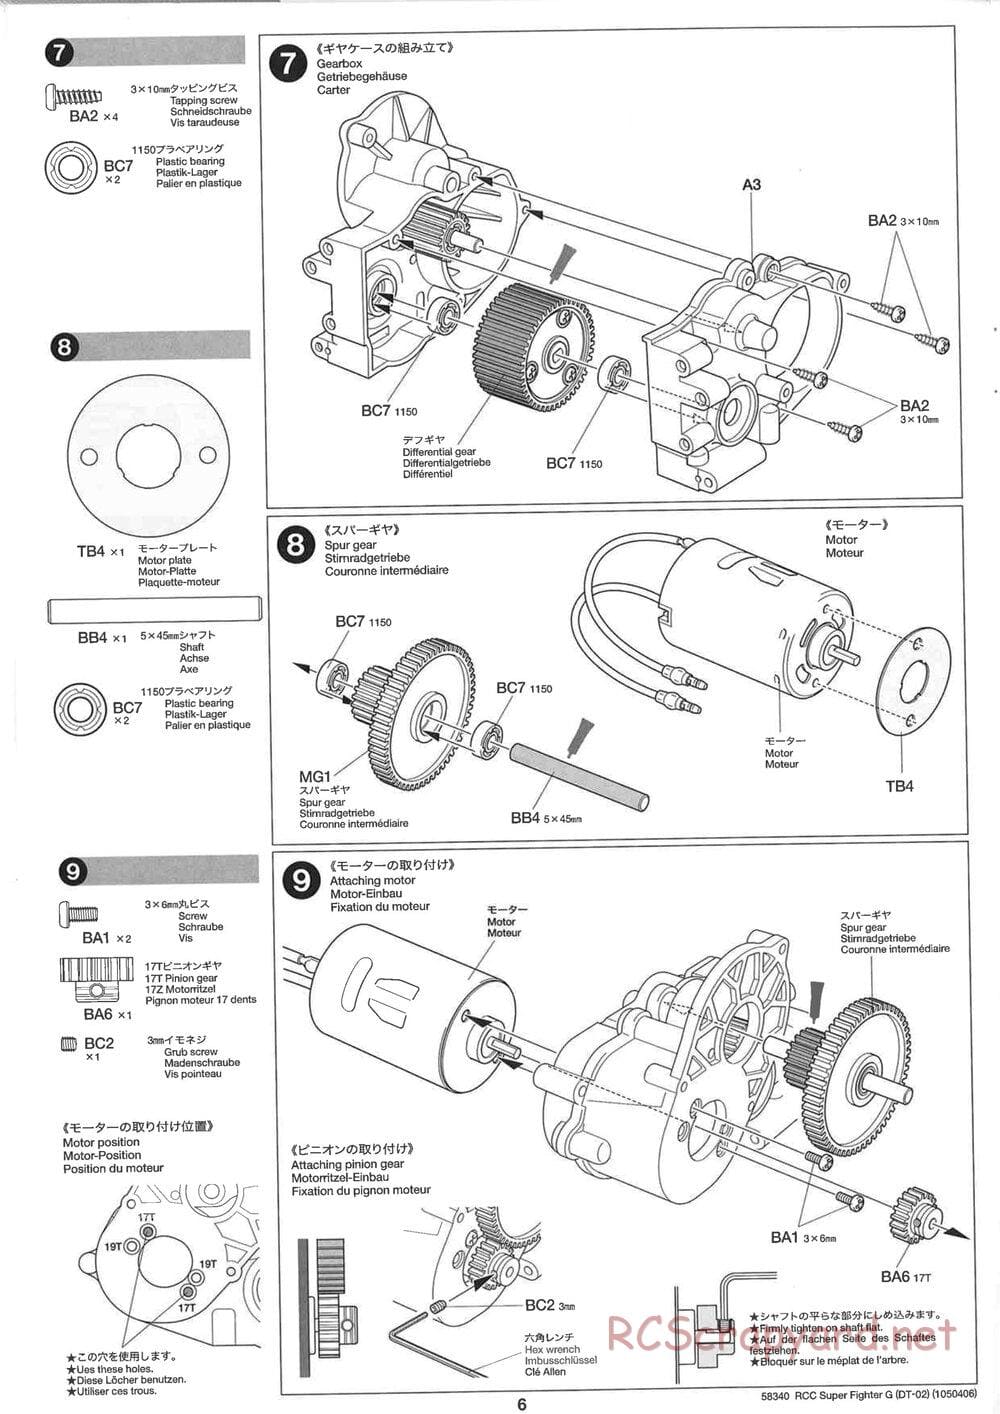 Tamiya - Super Fighter G Chassis - Manual - Page 6